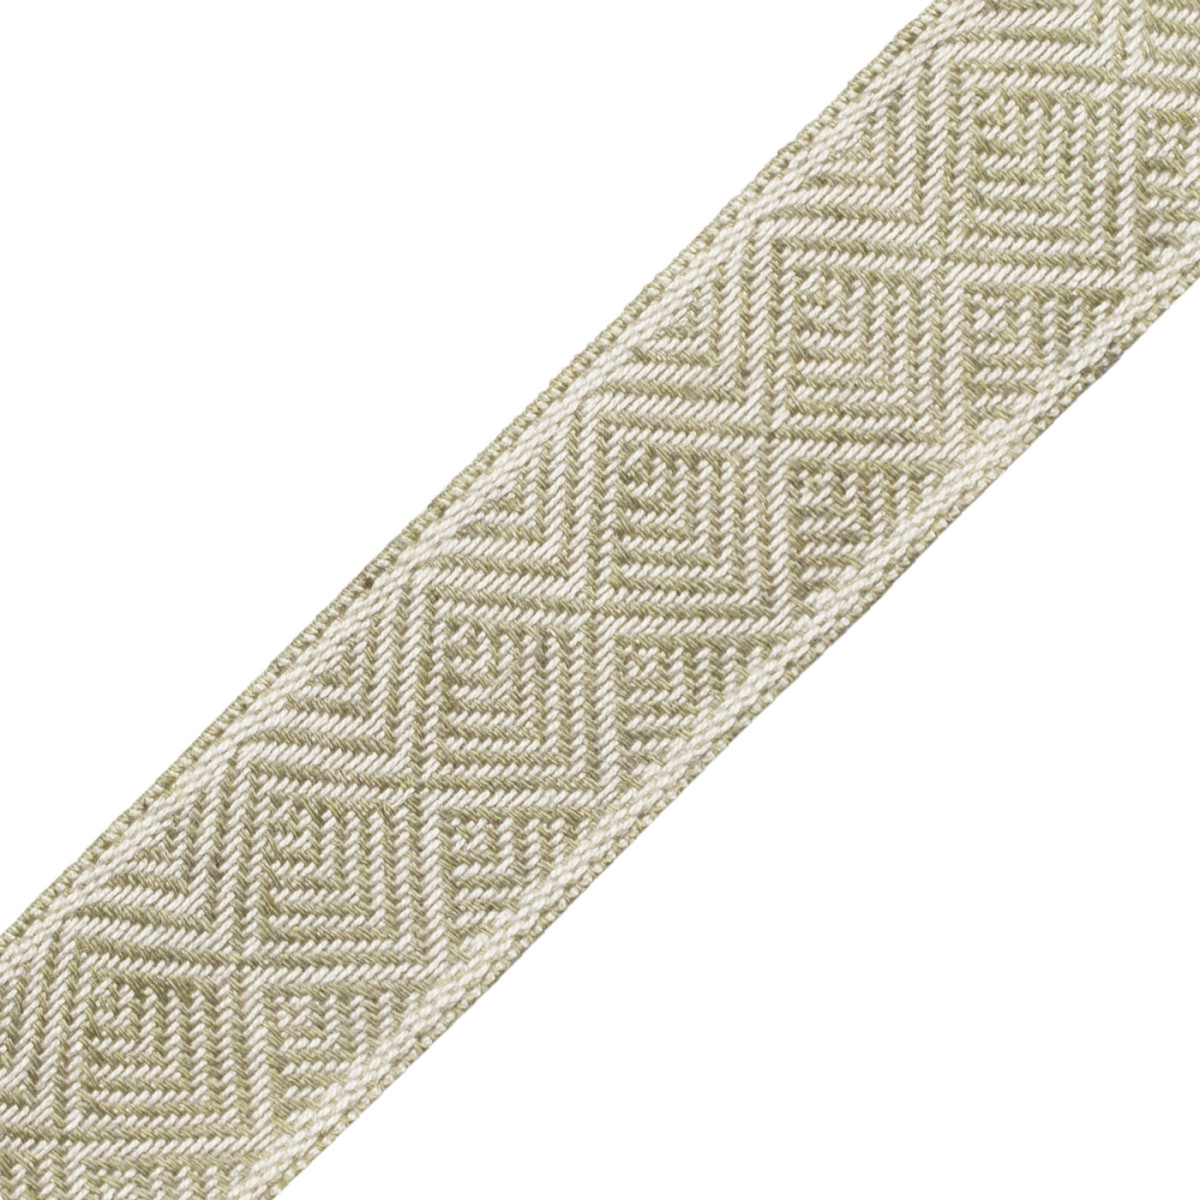 SOMERSET GEOMETRIC BORDER - WILLOW - Samuel and Sons